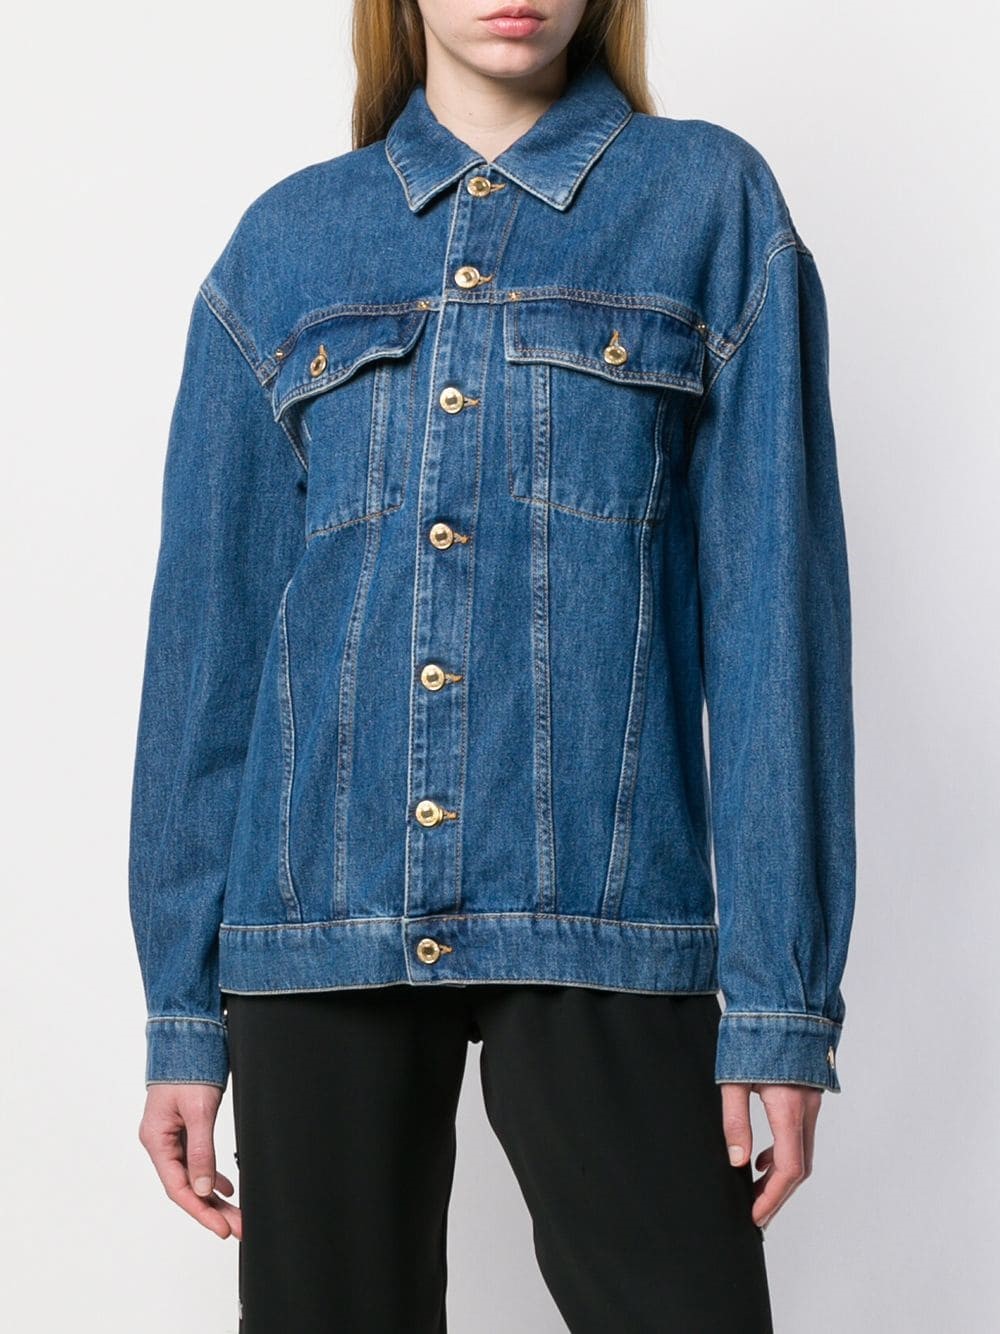 moschino TEDDY BEAR DENIM JACKET available on montiboutique.com 